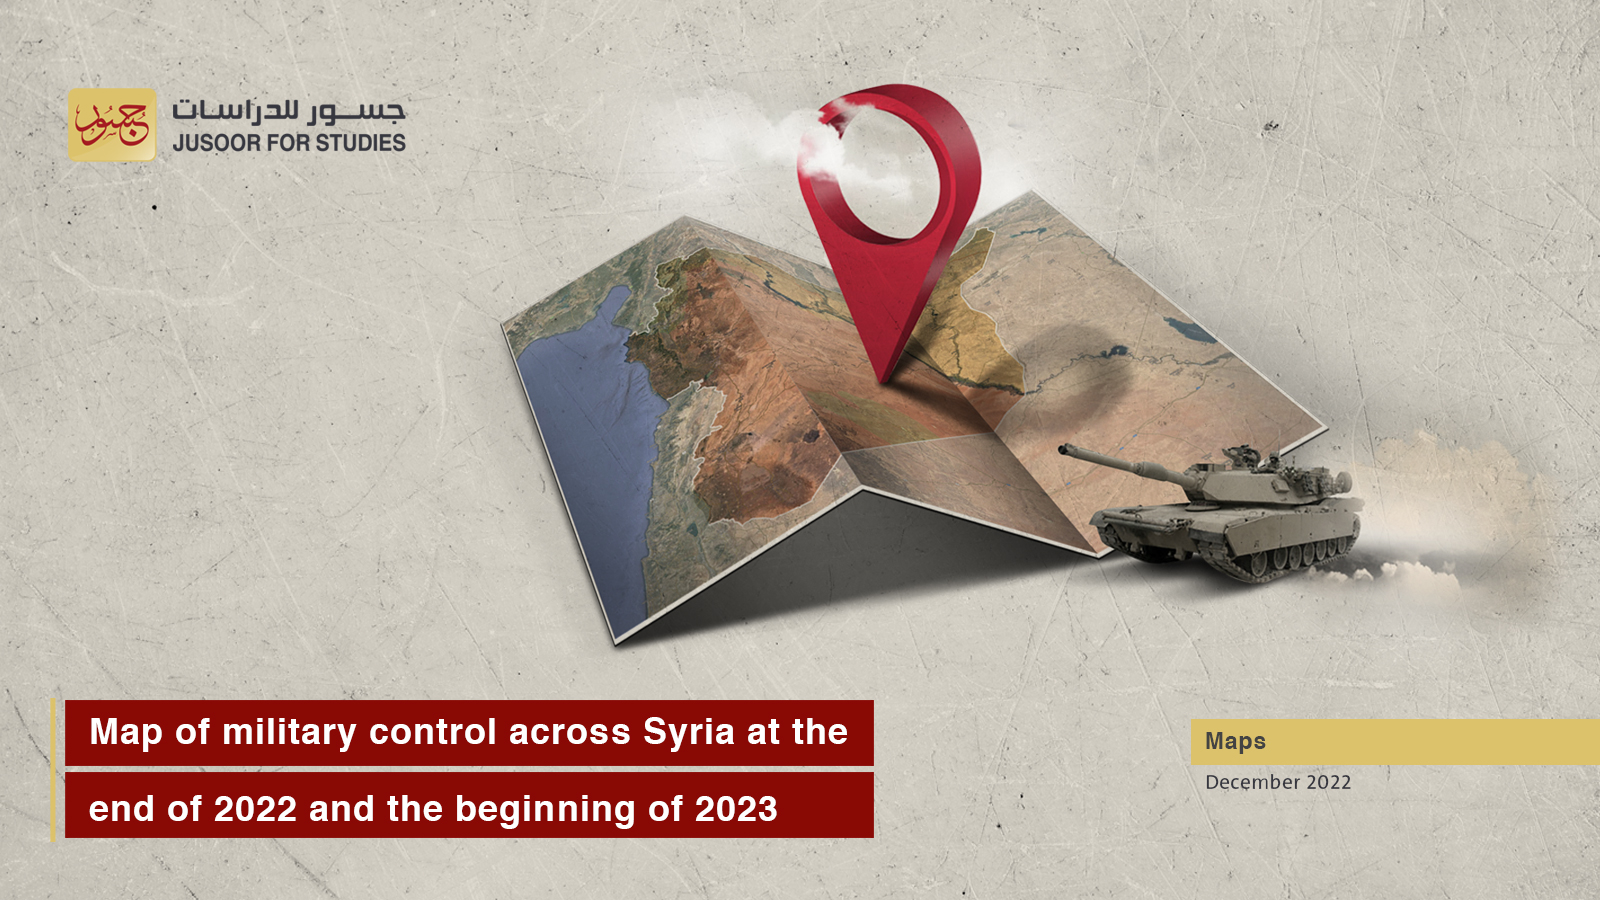 Map of military control across Syria at the end of 2022 and the beginning of 2023